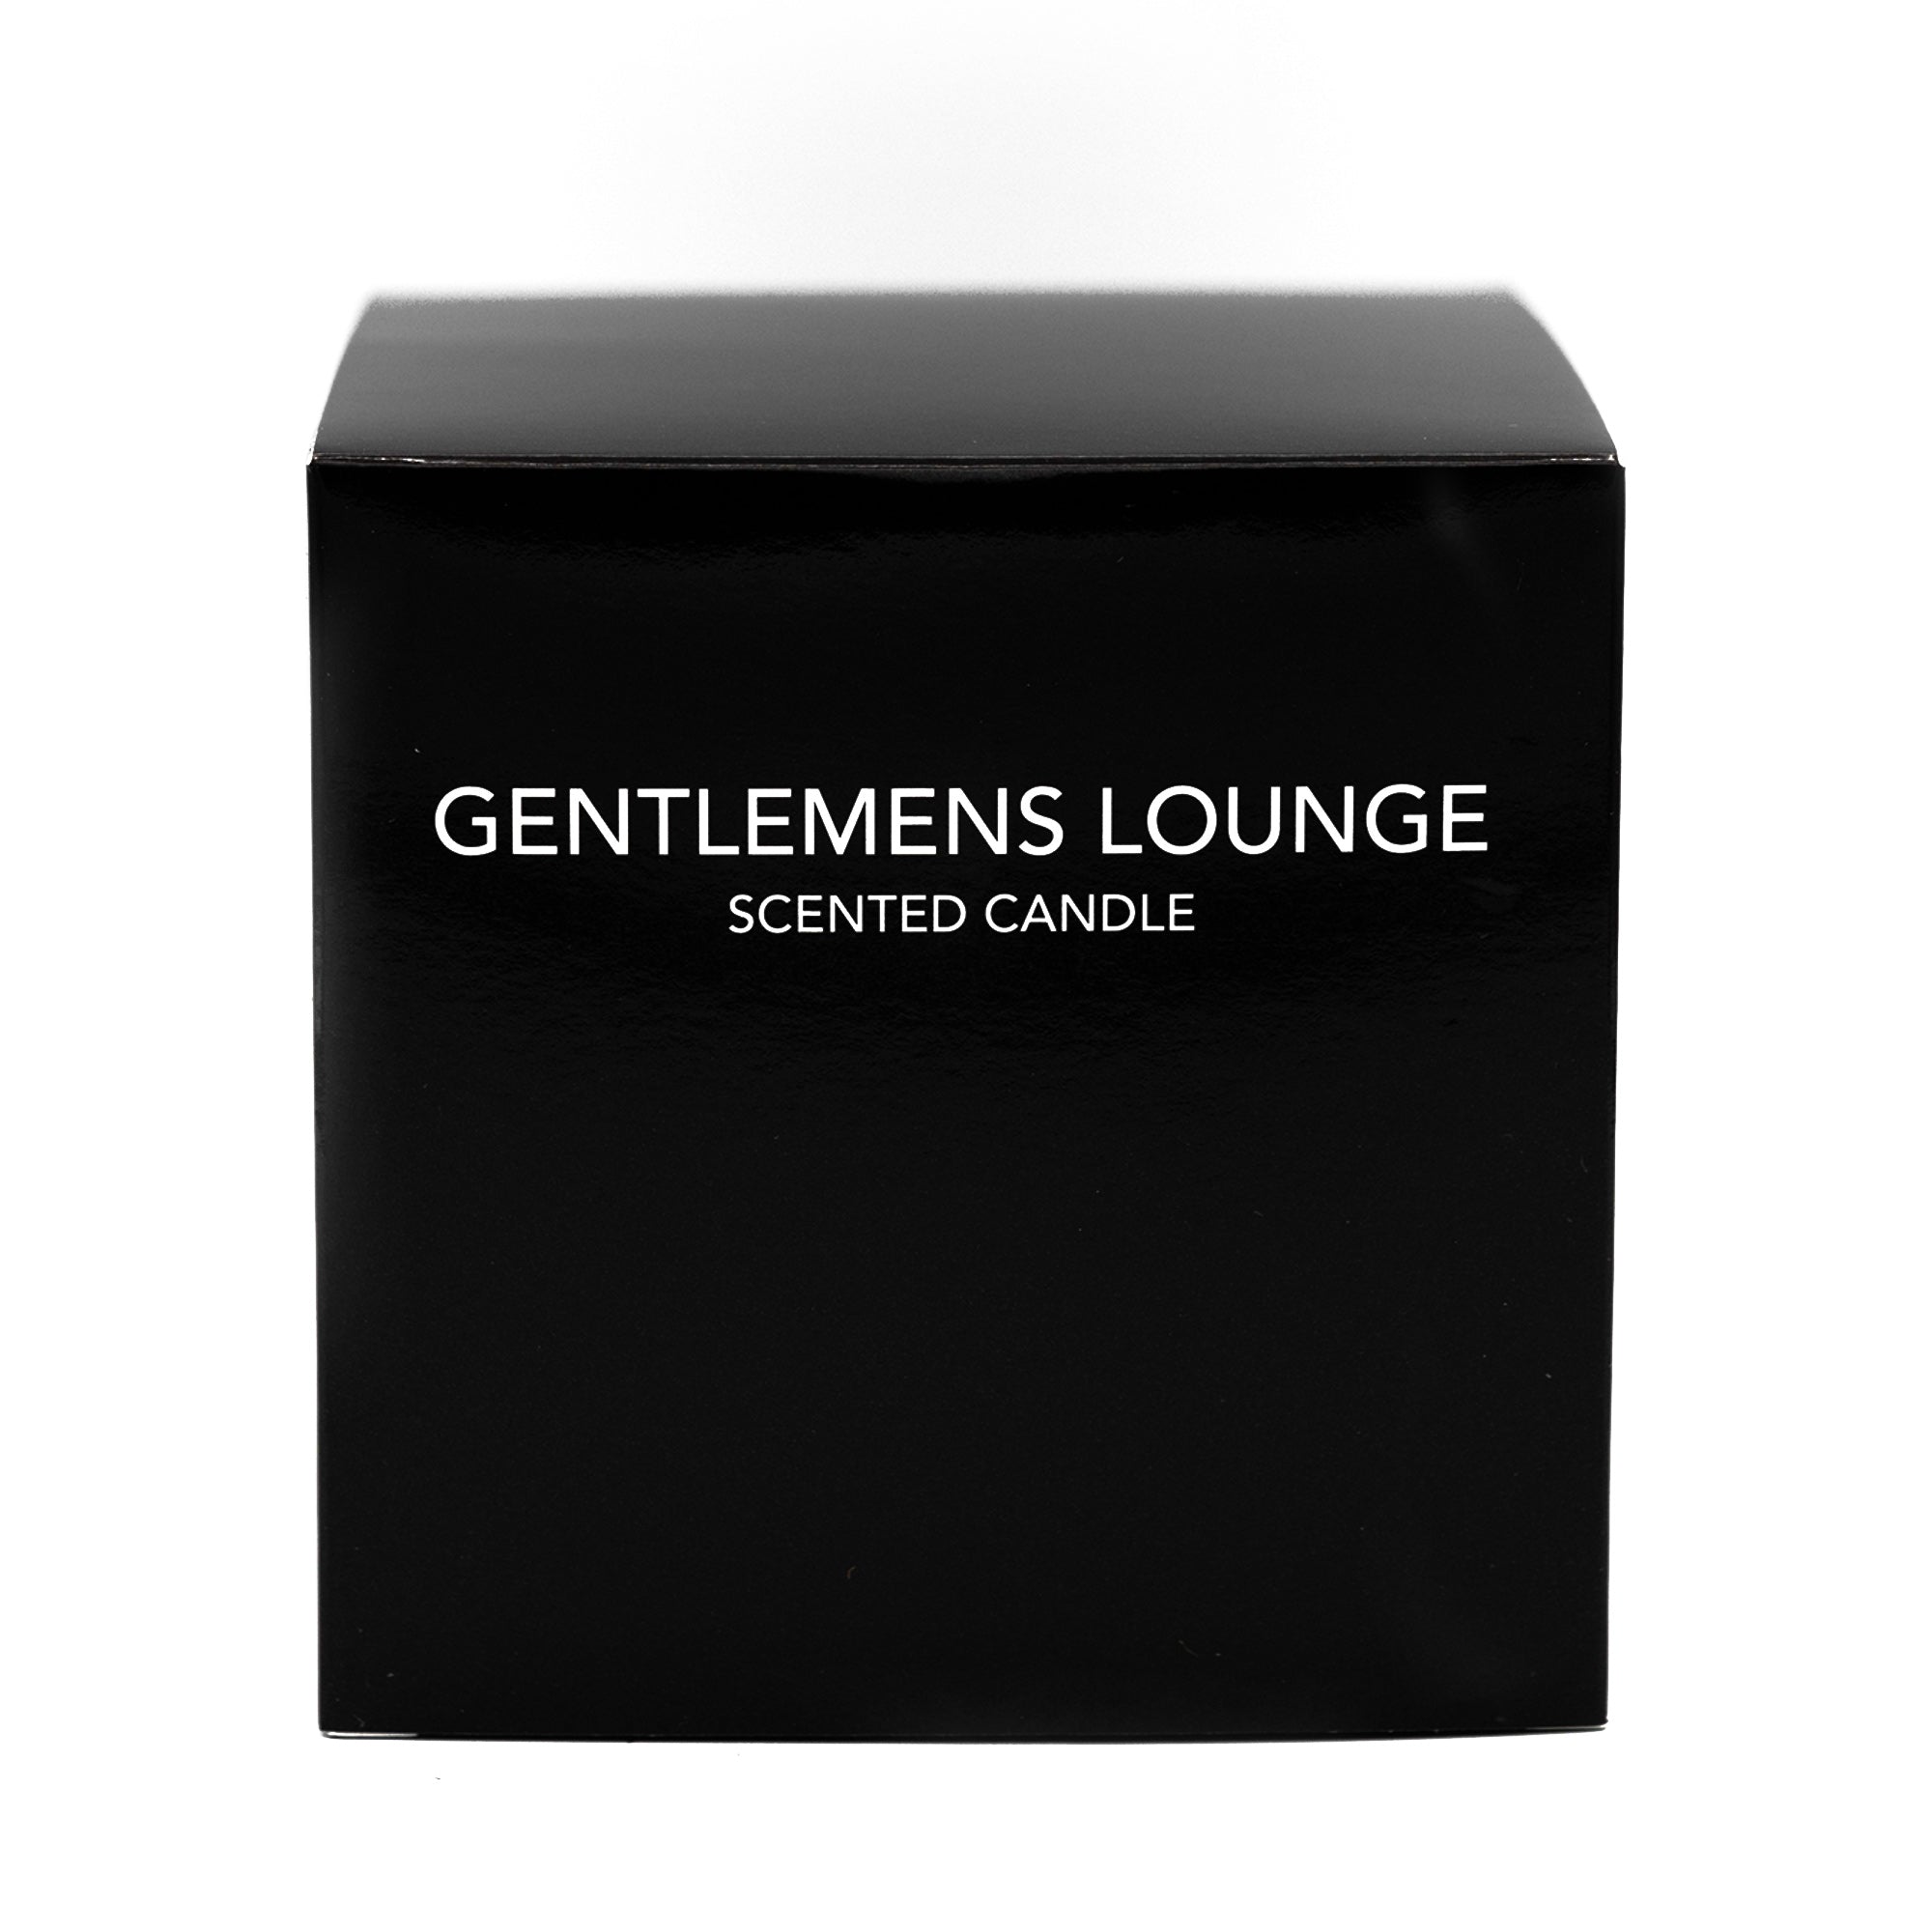 GENTLEMENS LOUNGE Scented Candle Box